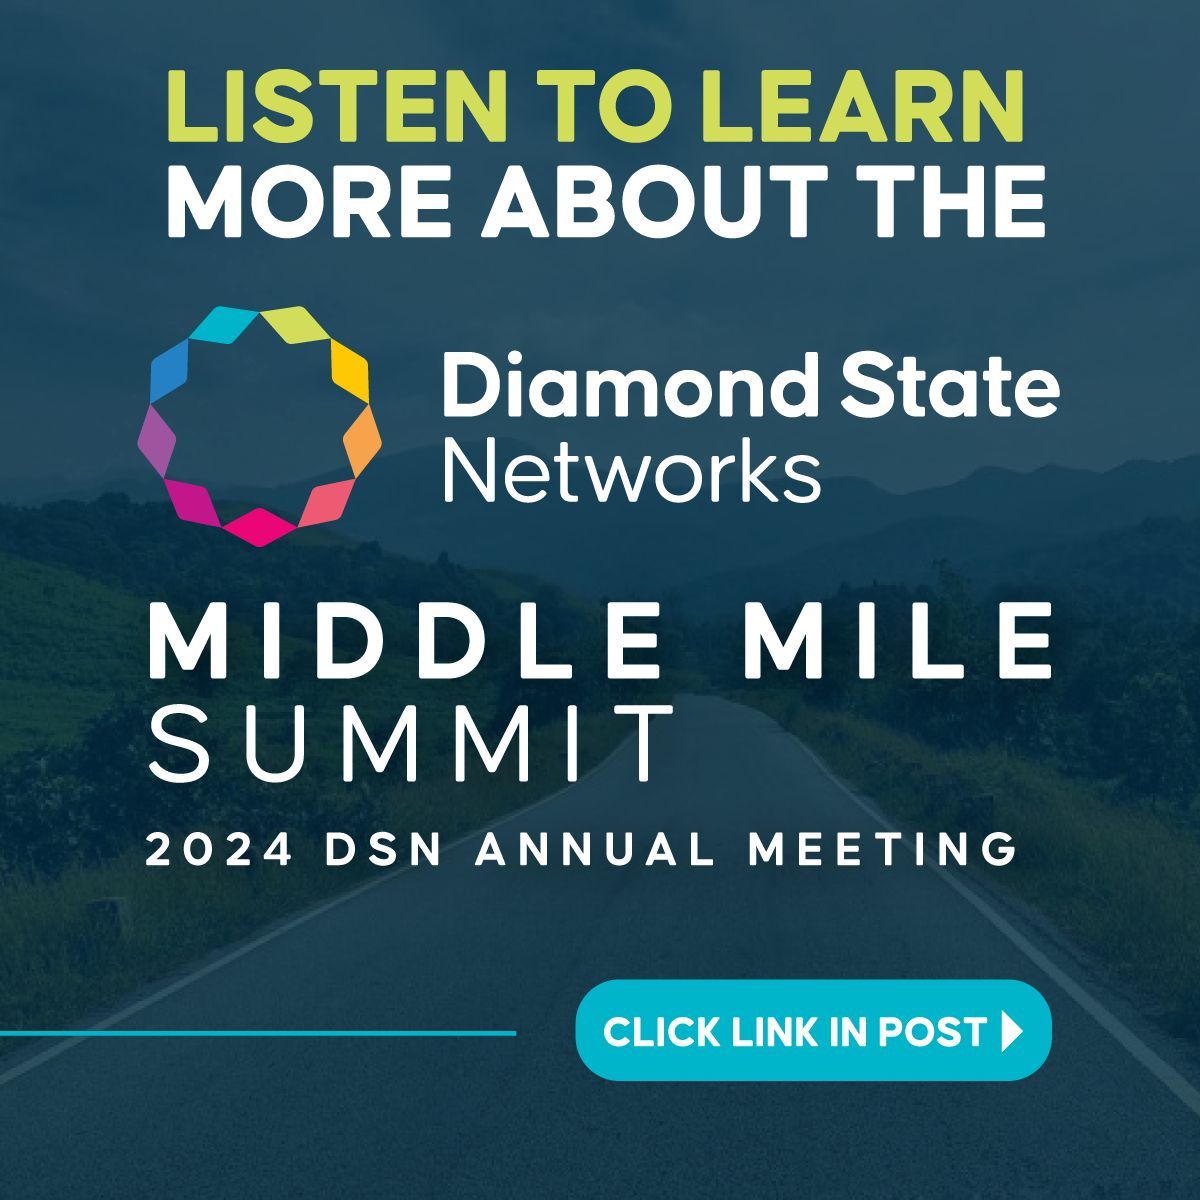 We're so lucky to have an outlet like @PodcastBunch Podcast take time to showcase the DSN Middle Mile Summit Annual Meeting. Click the link below to learn more about the conference!
 
soundcloud.com/broadband-bunc…